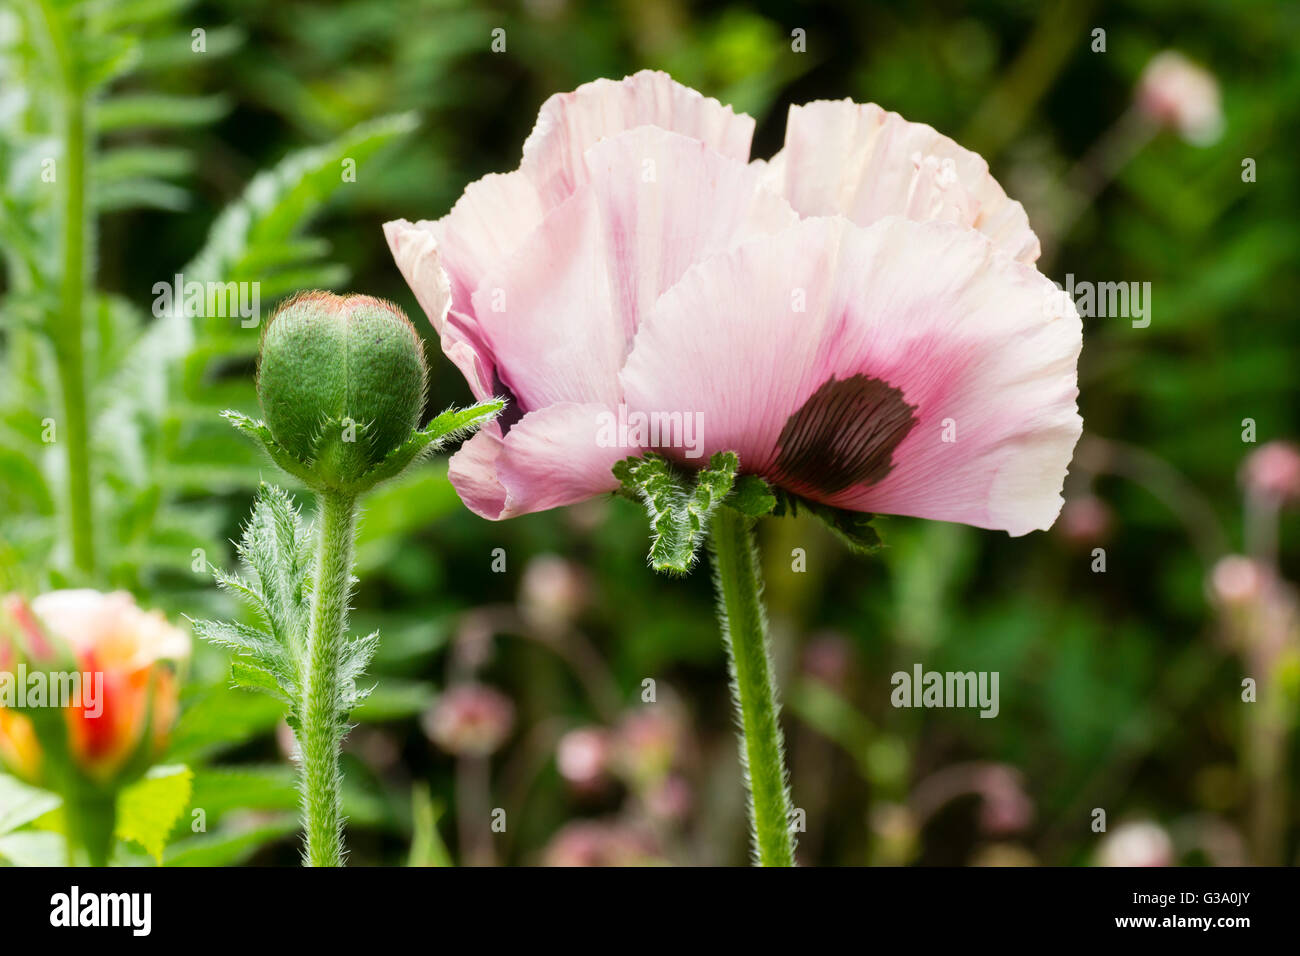 Flower and bud of the pale form of the oriental poppy, Papaver orientale 'Bolero' Stock Photo